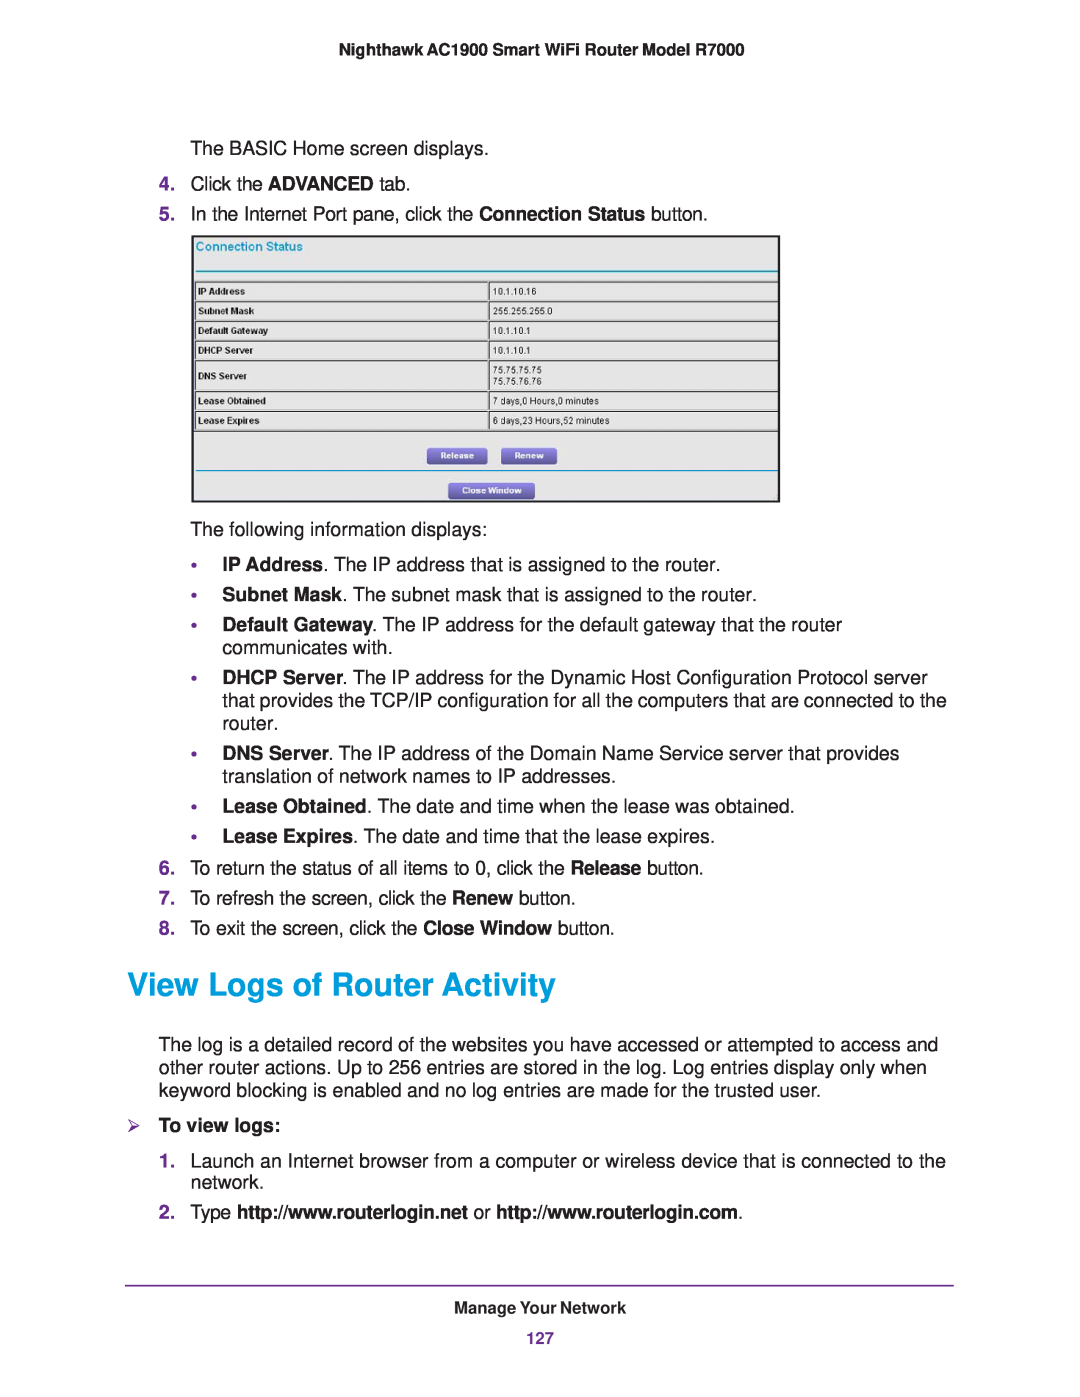 NETGEAR R7000 user manual View Logs of Router Activity,  To view logs 